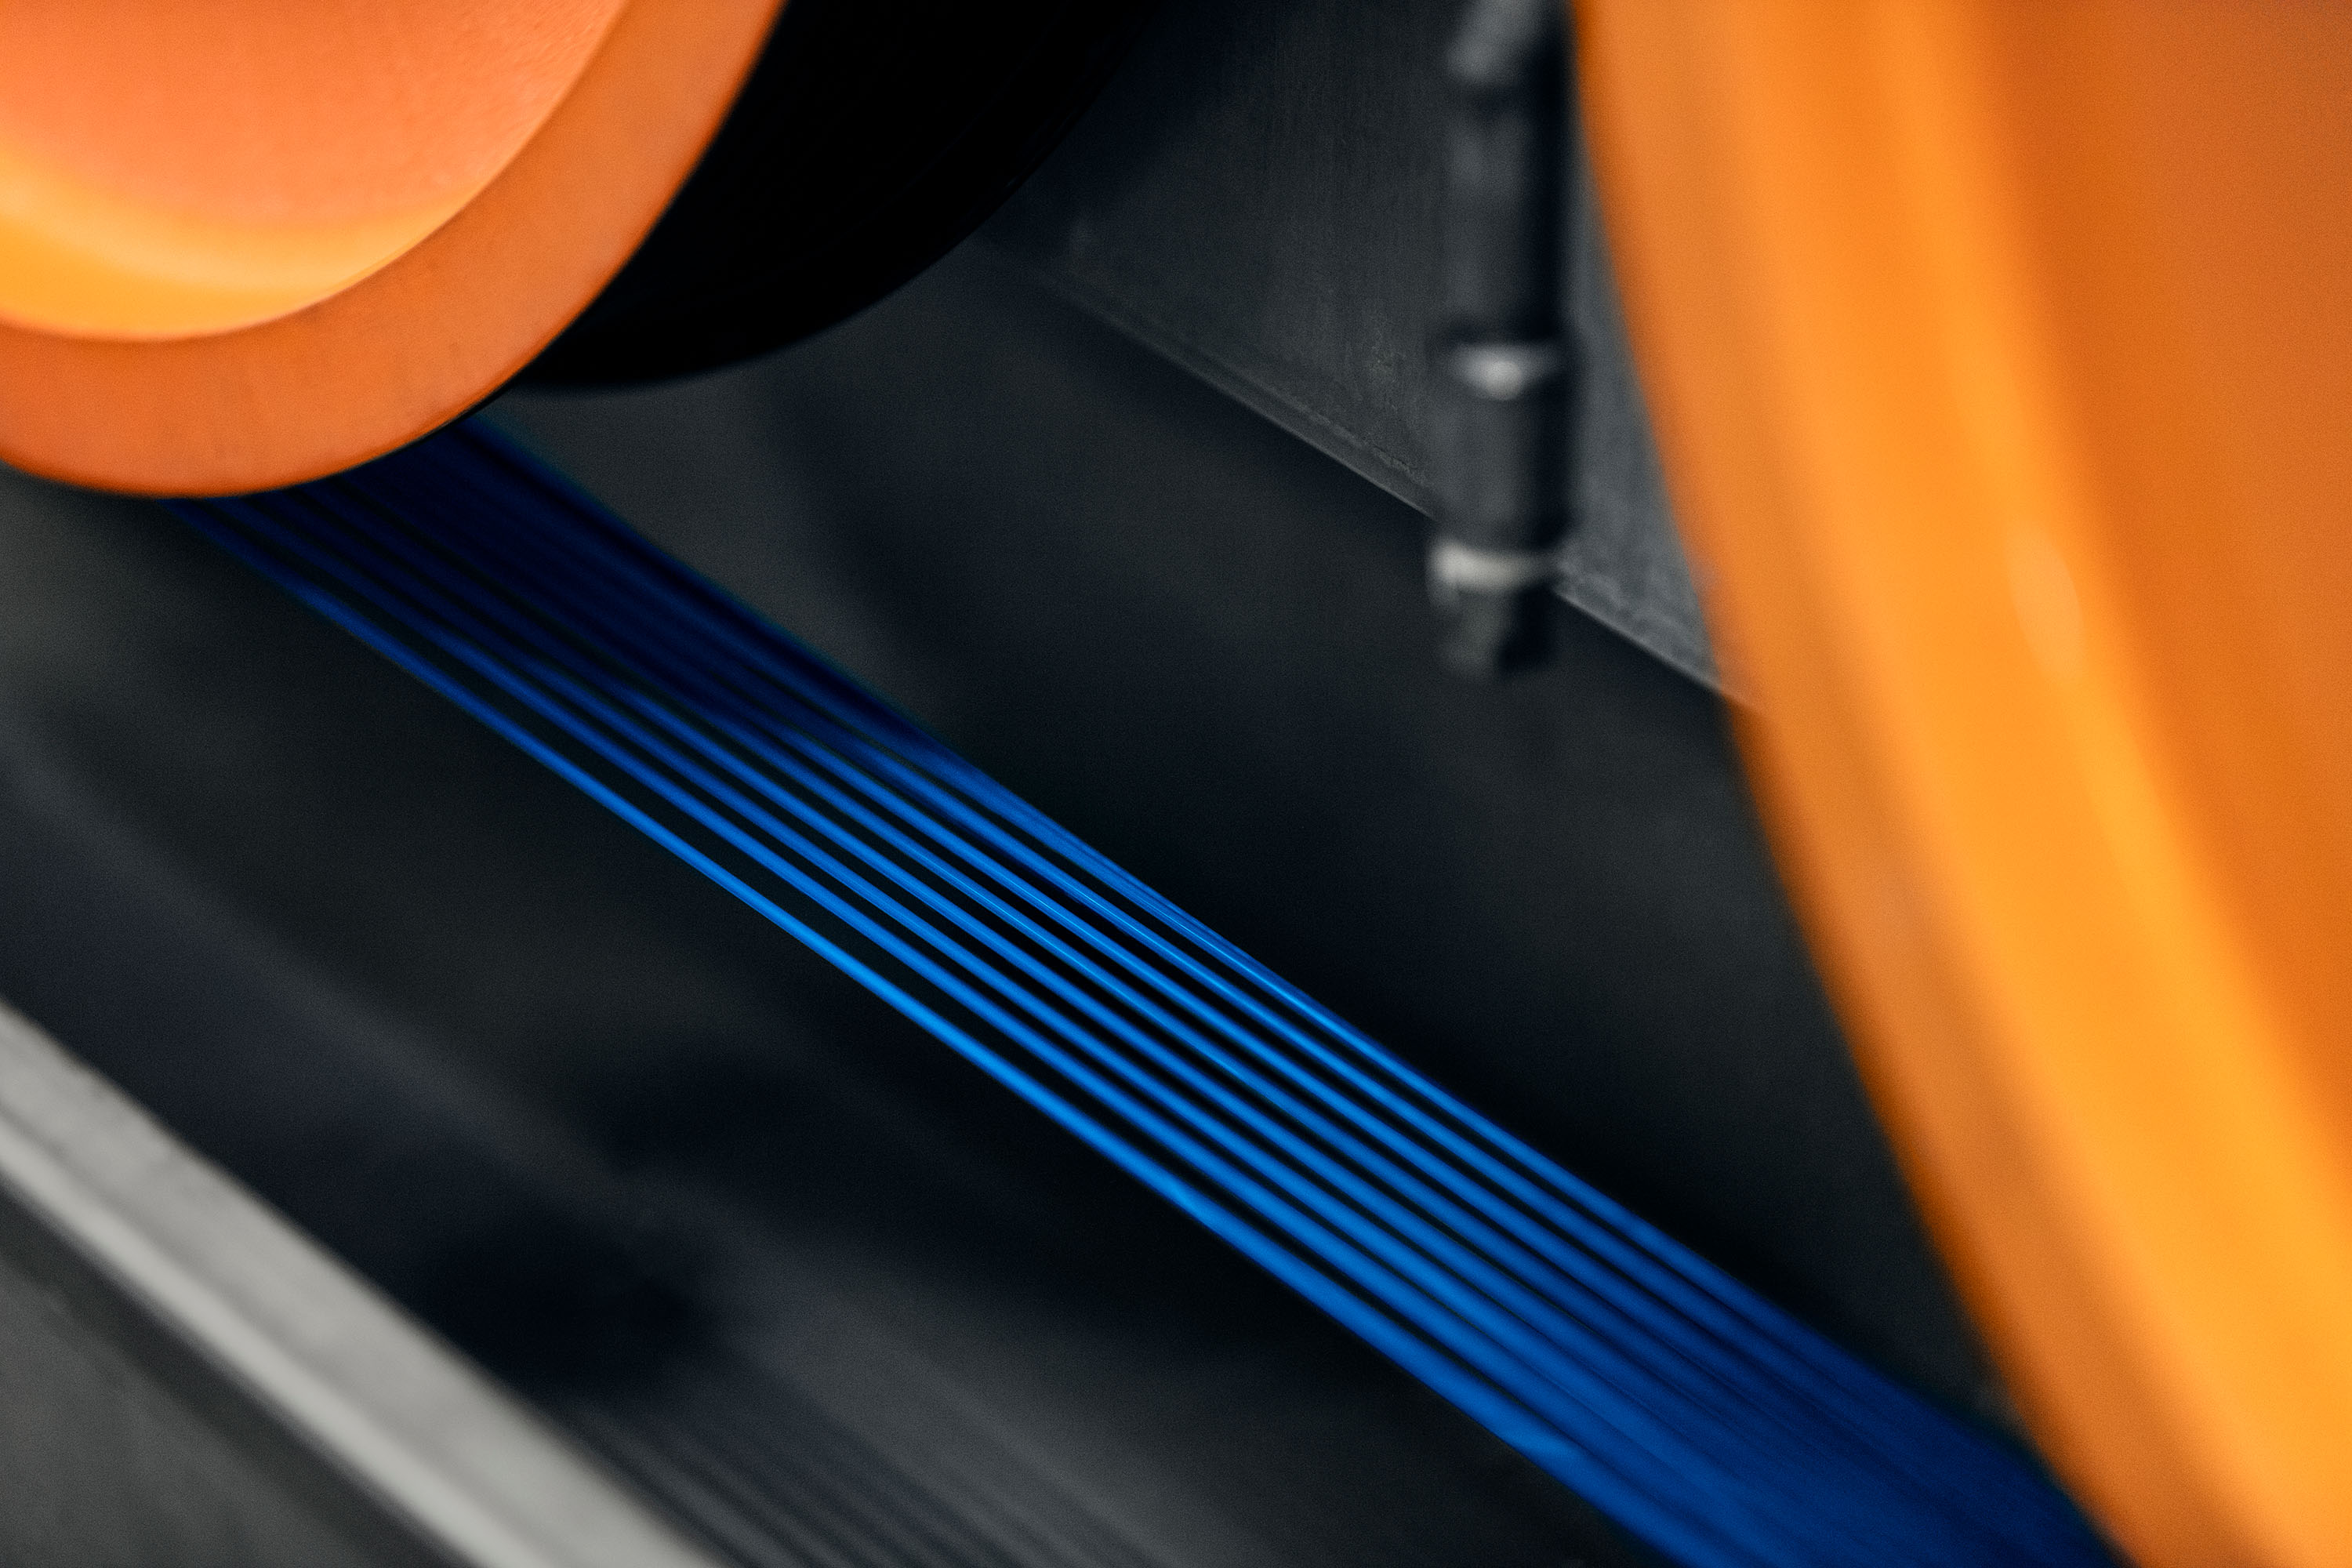 Close-up of blue optical fiber wires running through a machine line with orange tracked wheels.